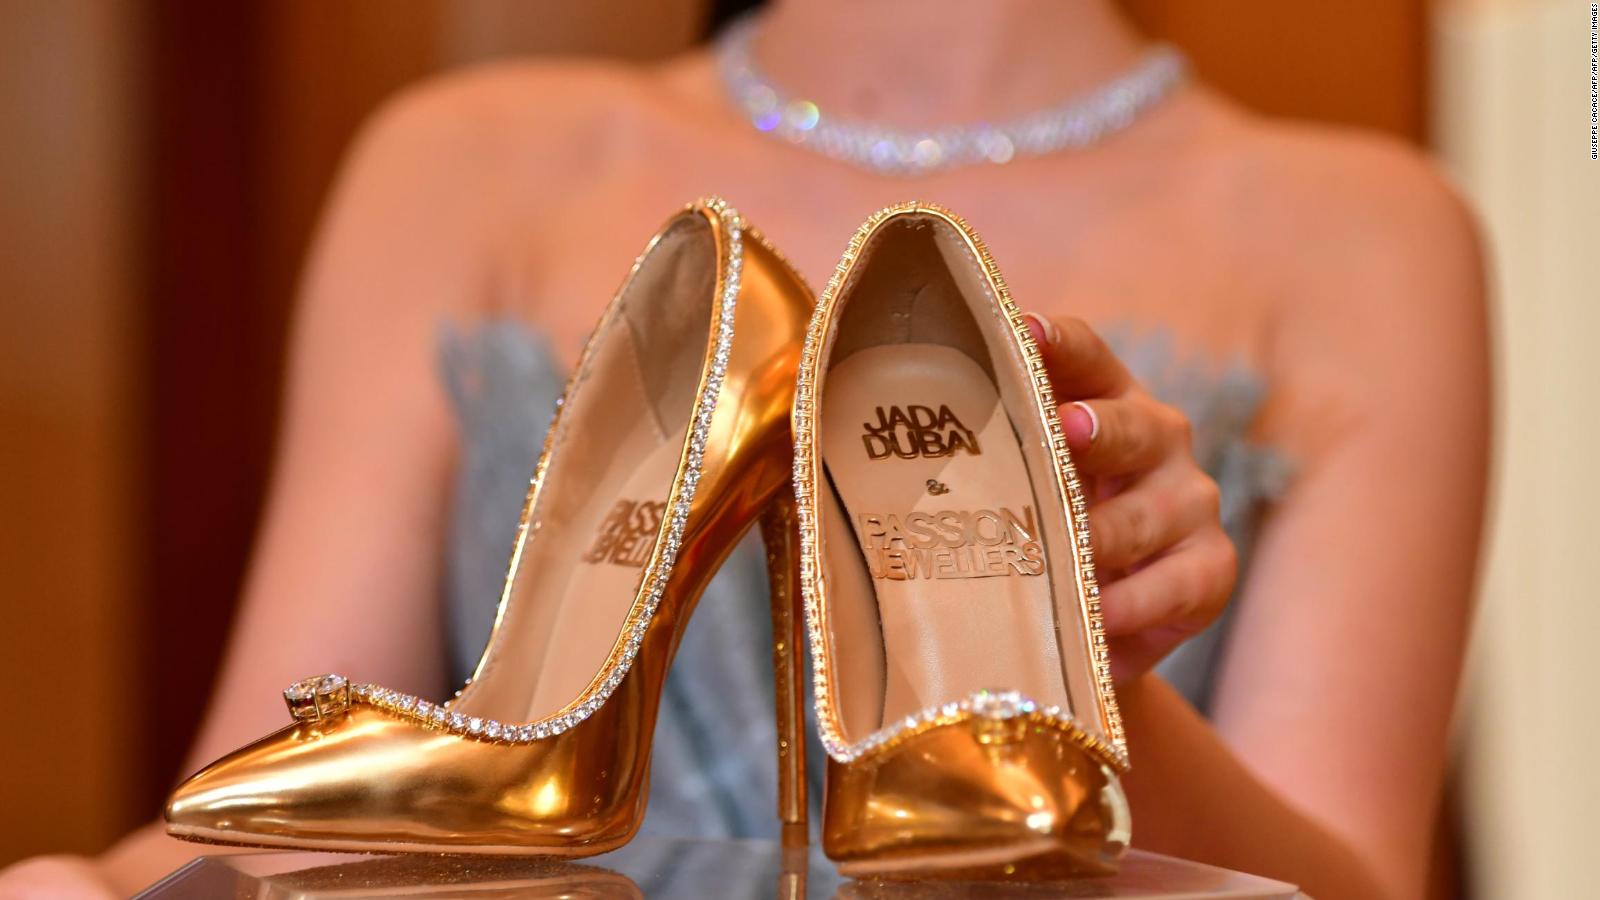 World's 'most expensive' shoes worth $17 million ready for launch in Dubai